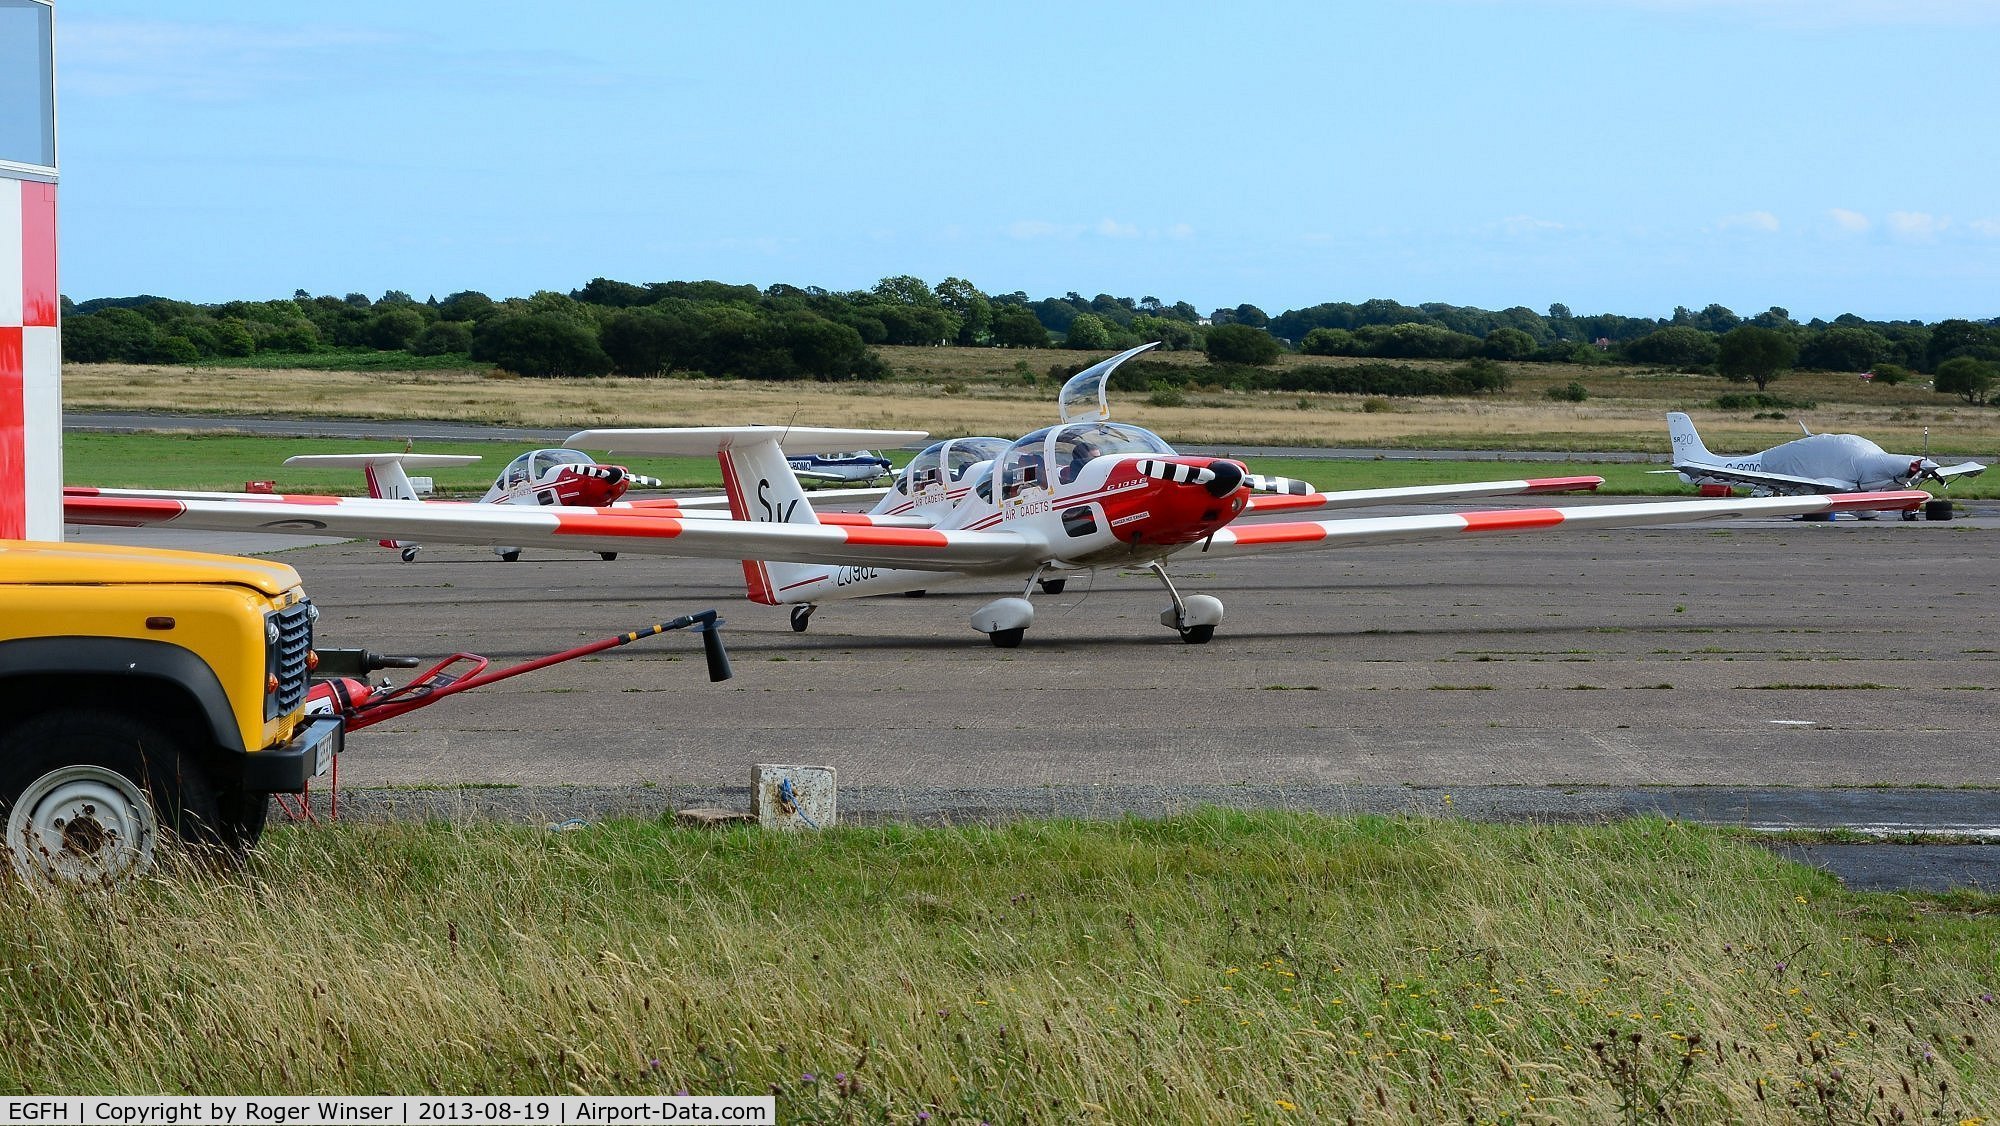 Swansea Airport, Swansea, Wales United Kingdom (EGFH) - Three Air Cadets motor gliders on the apron at Swansea Airport.